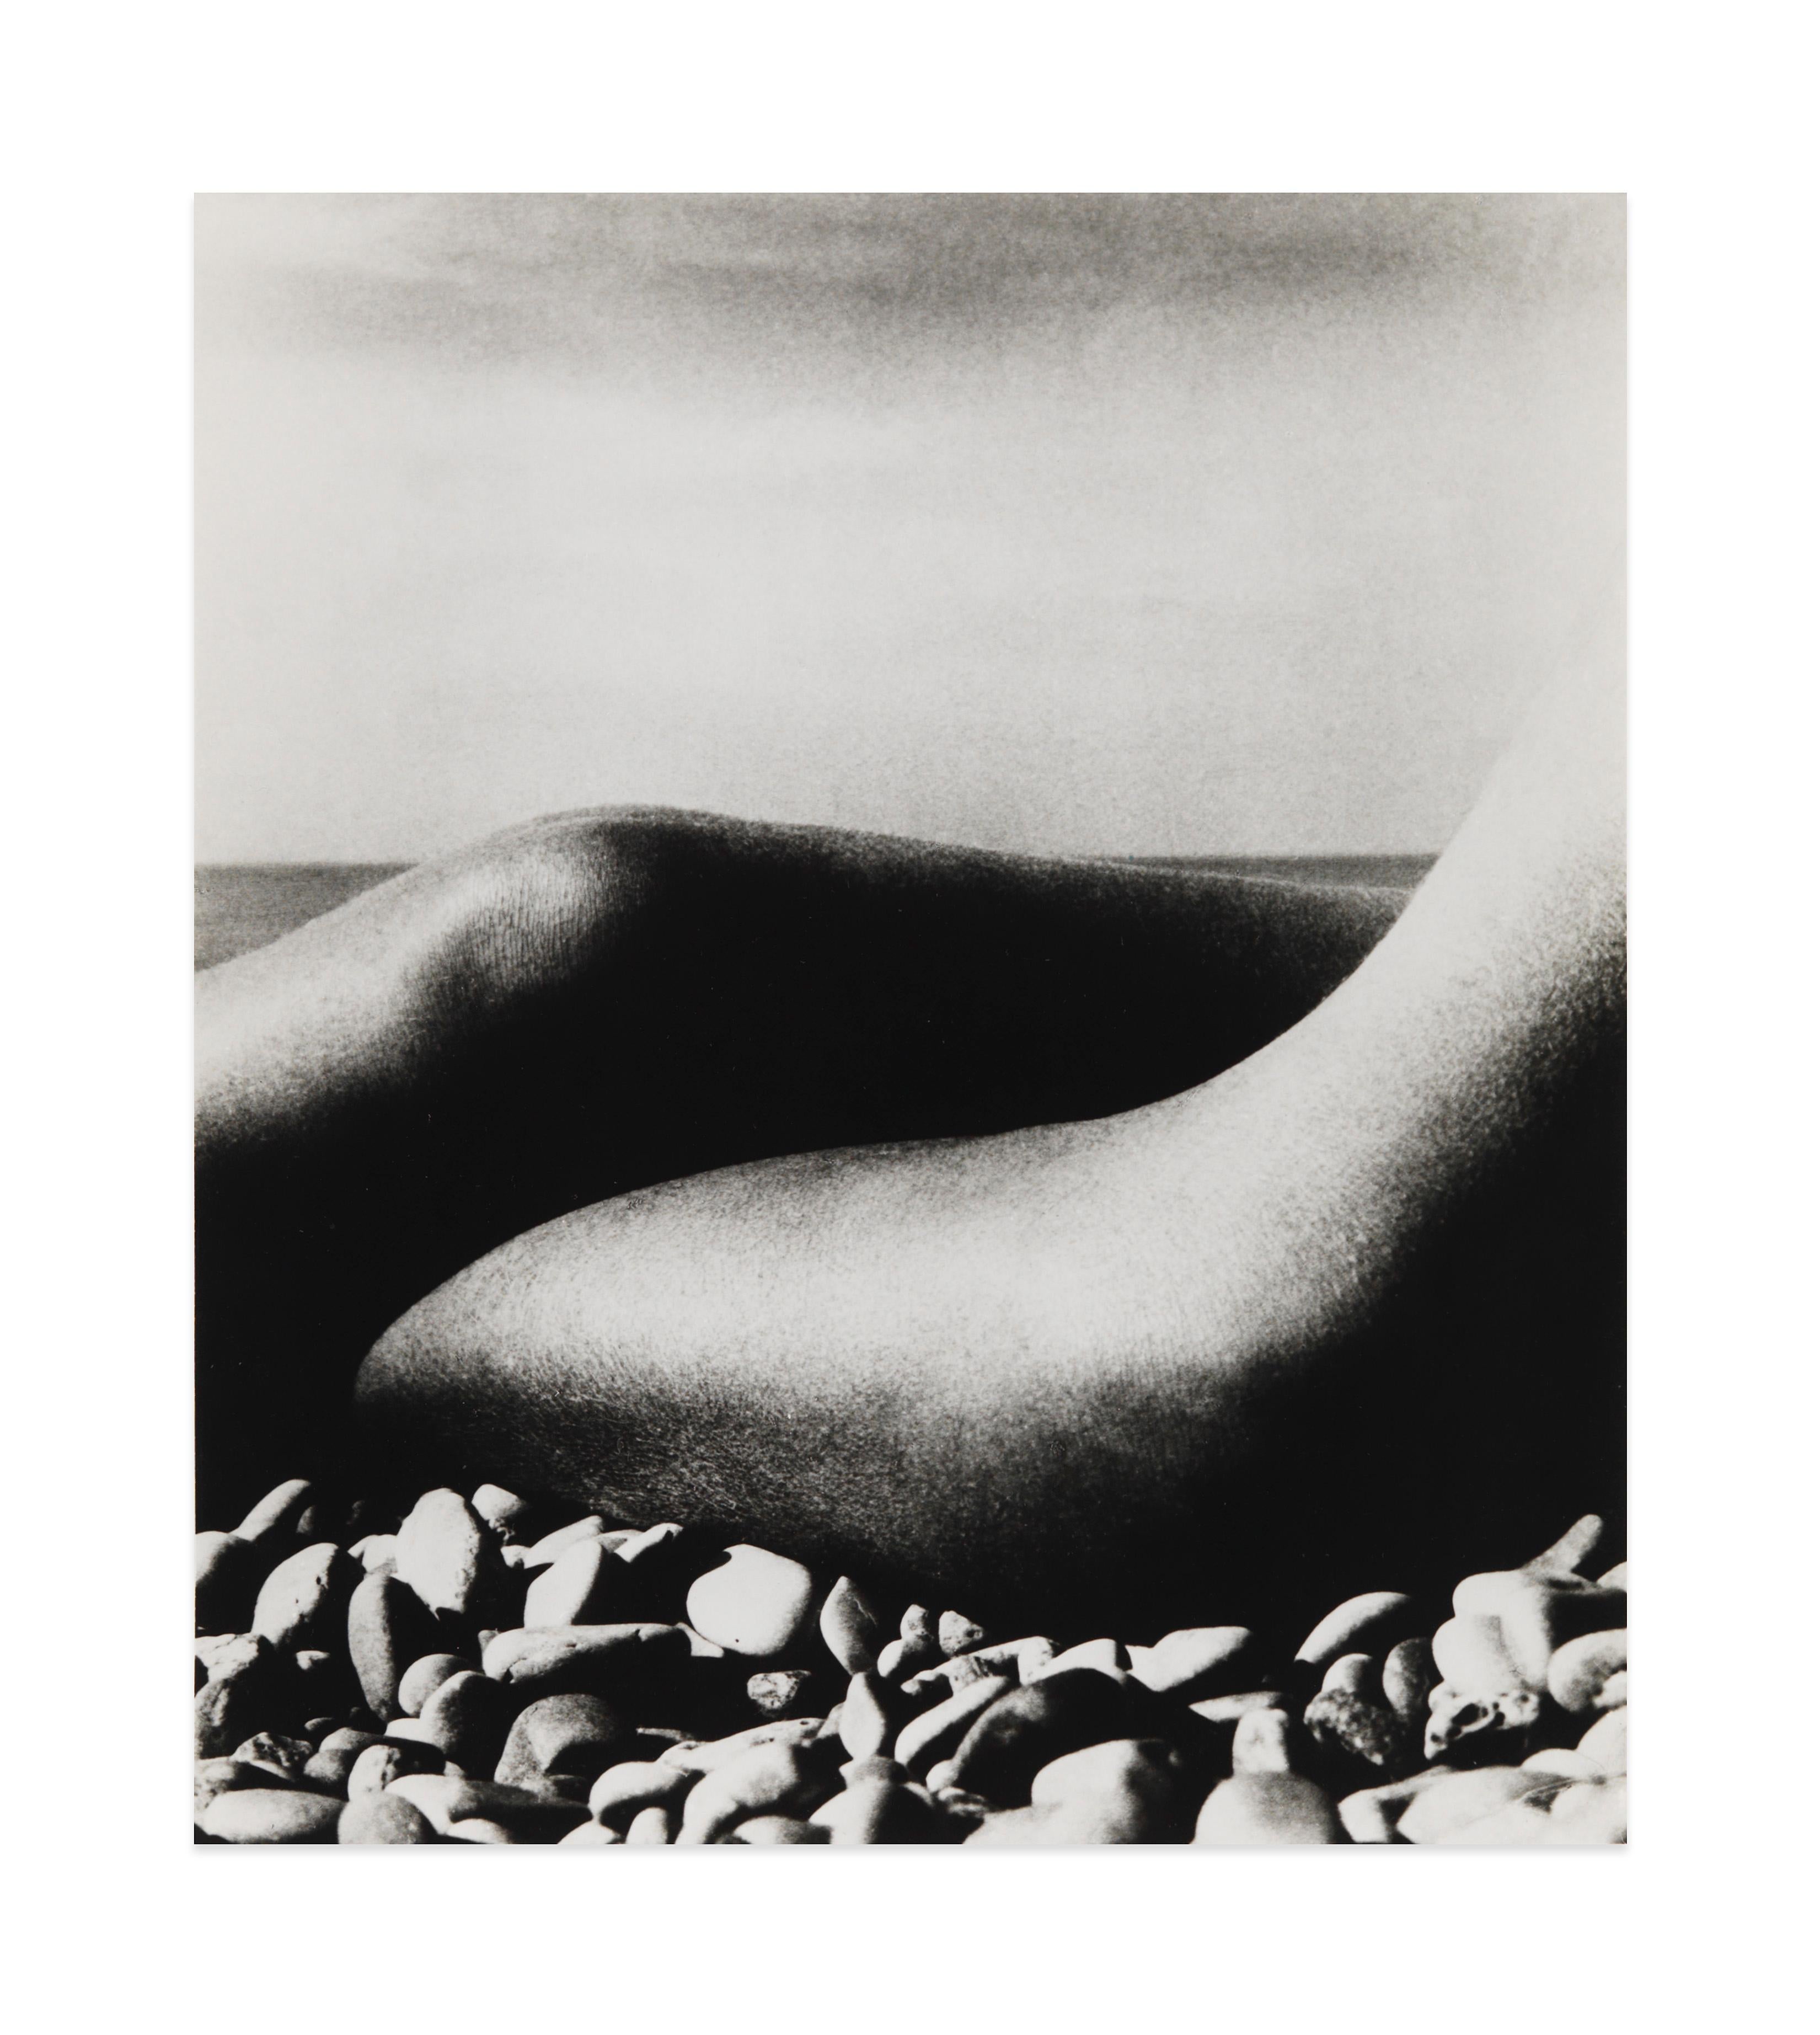 Nude, Baie des Anges, France - Photograph by Bill Brandt